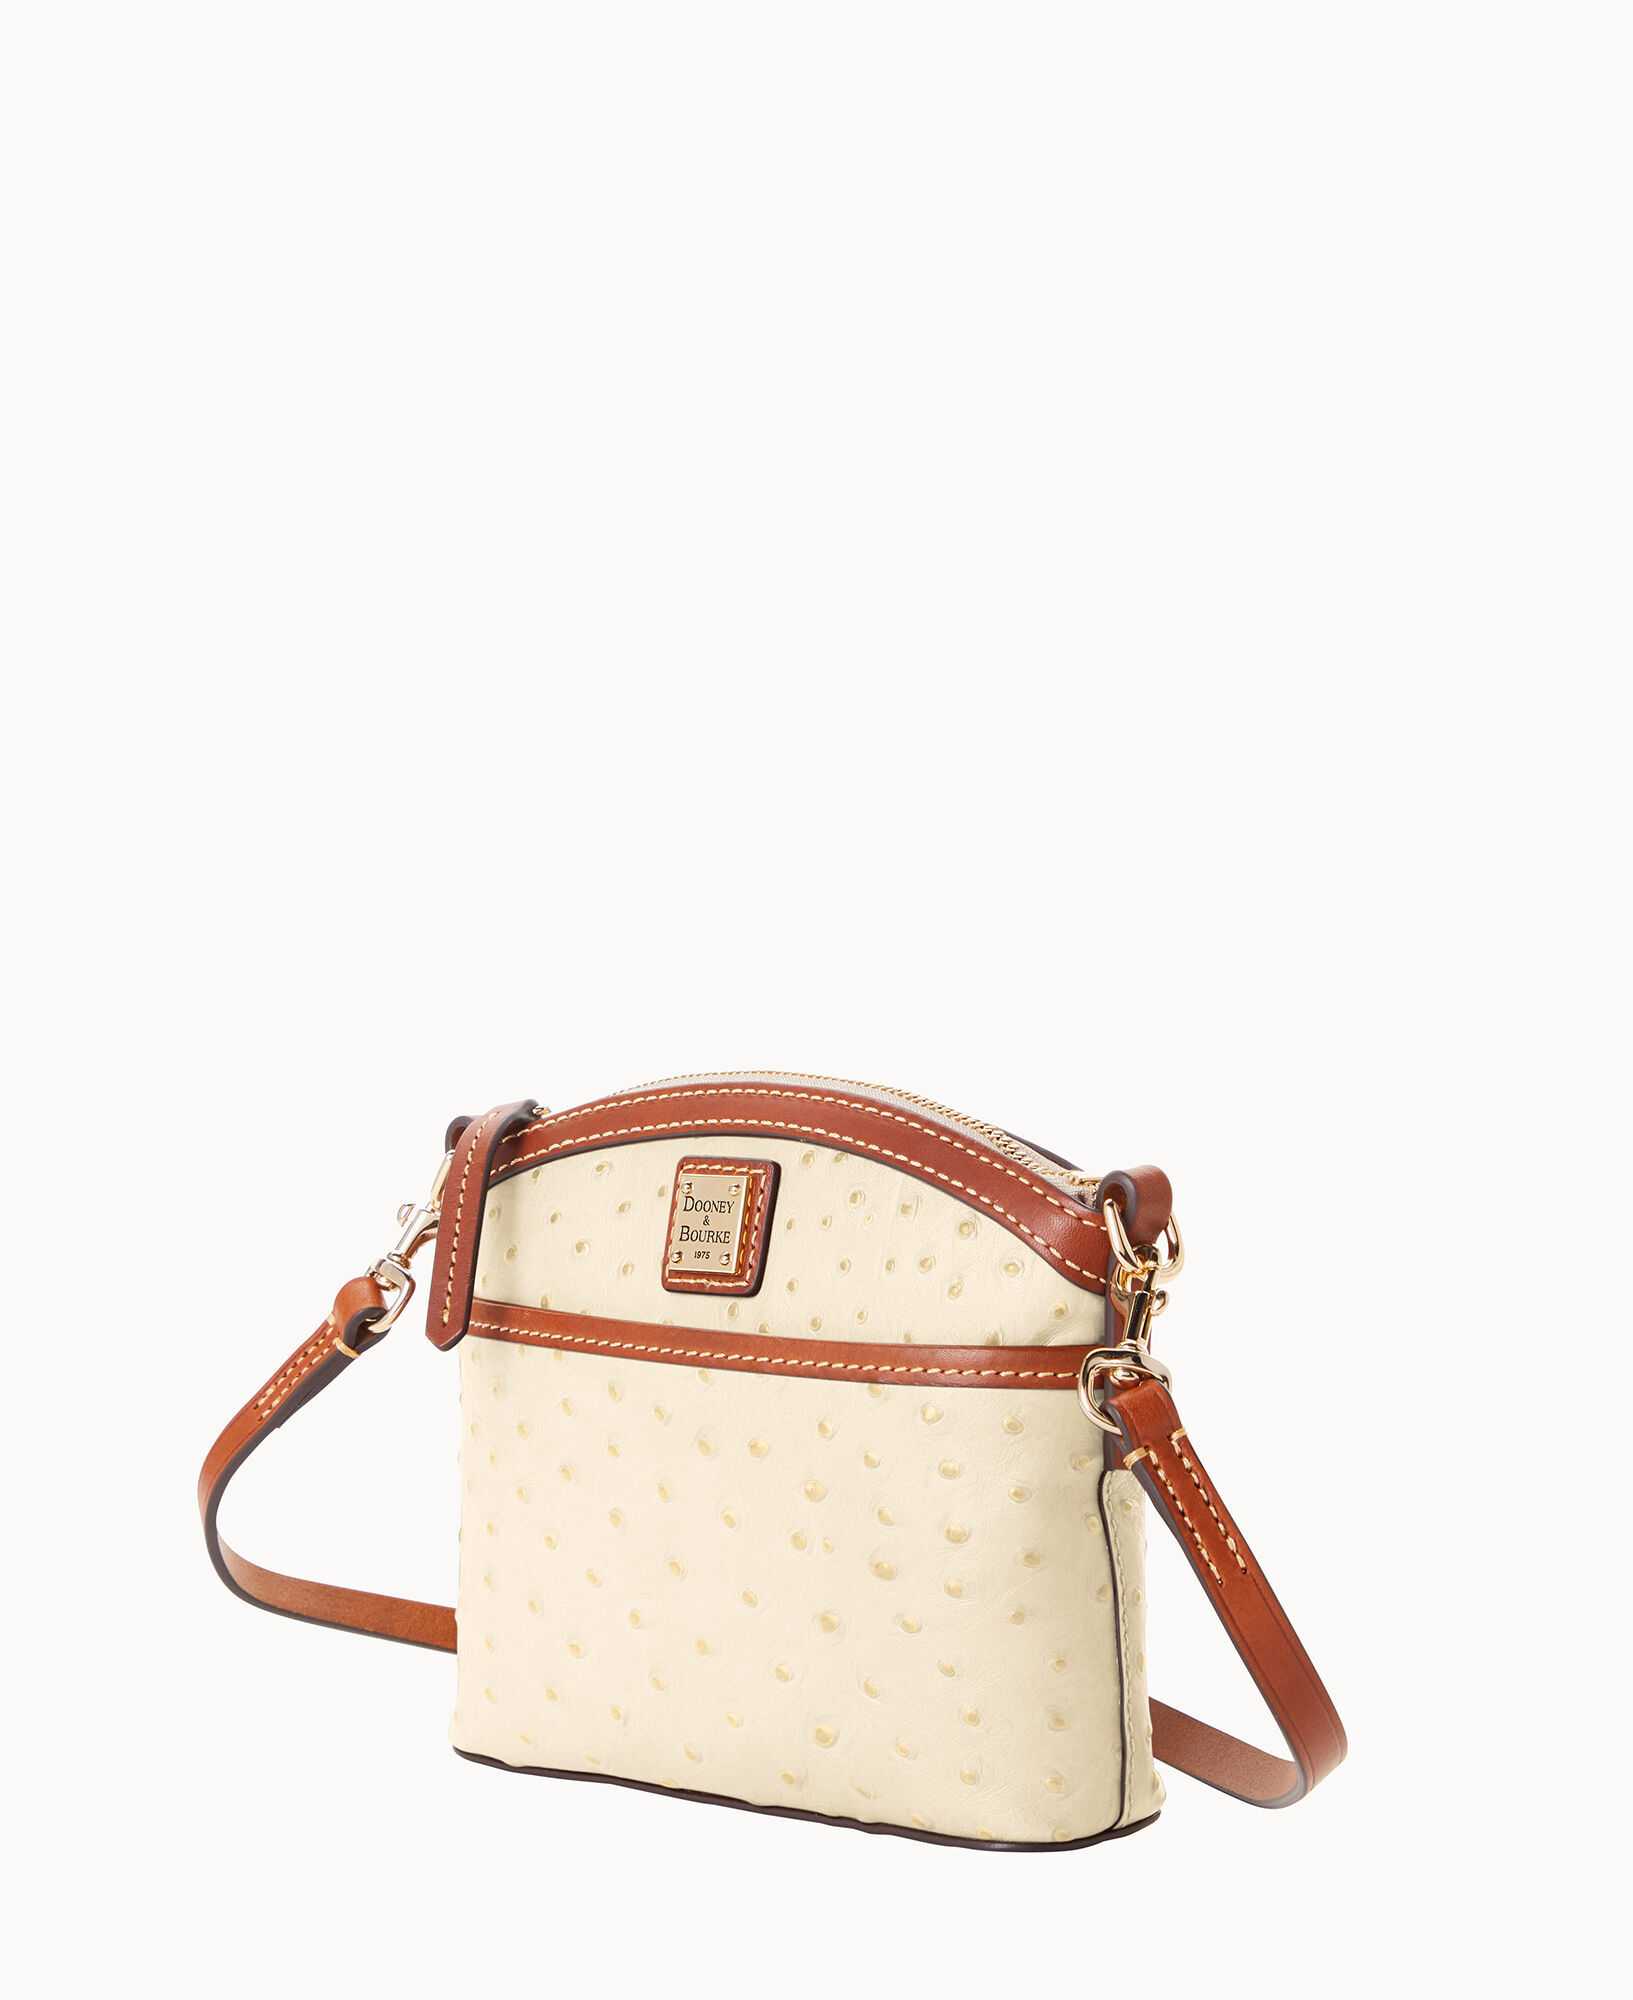 Dooney & Bourke Ostrich Collection Domed Crossbody Bag